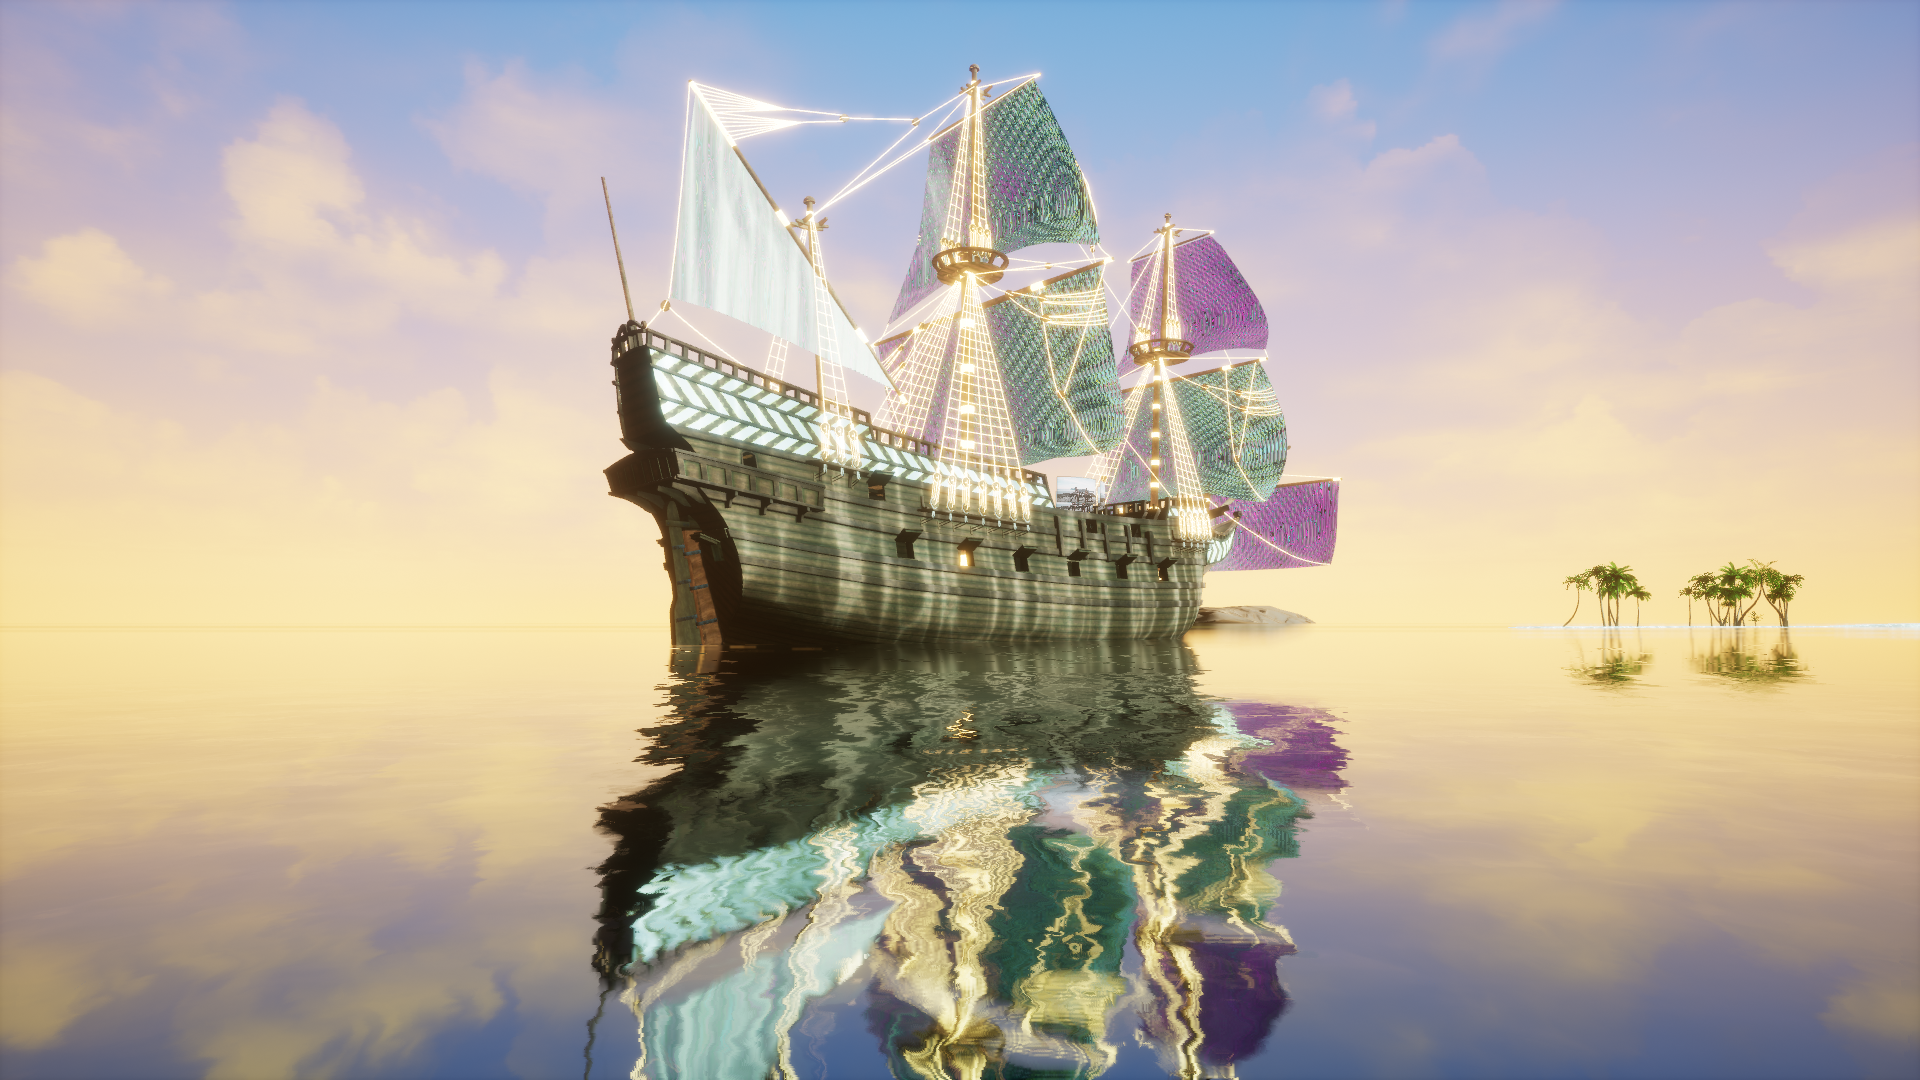 A screenshot of a pirate ship created to host a Soundscape concert.